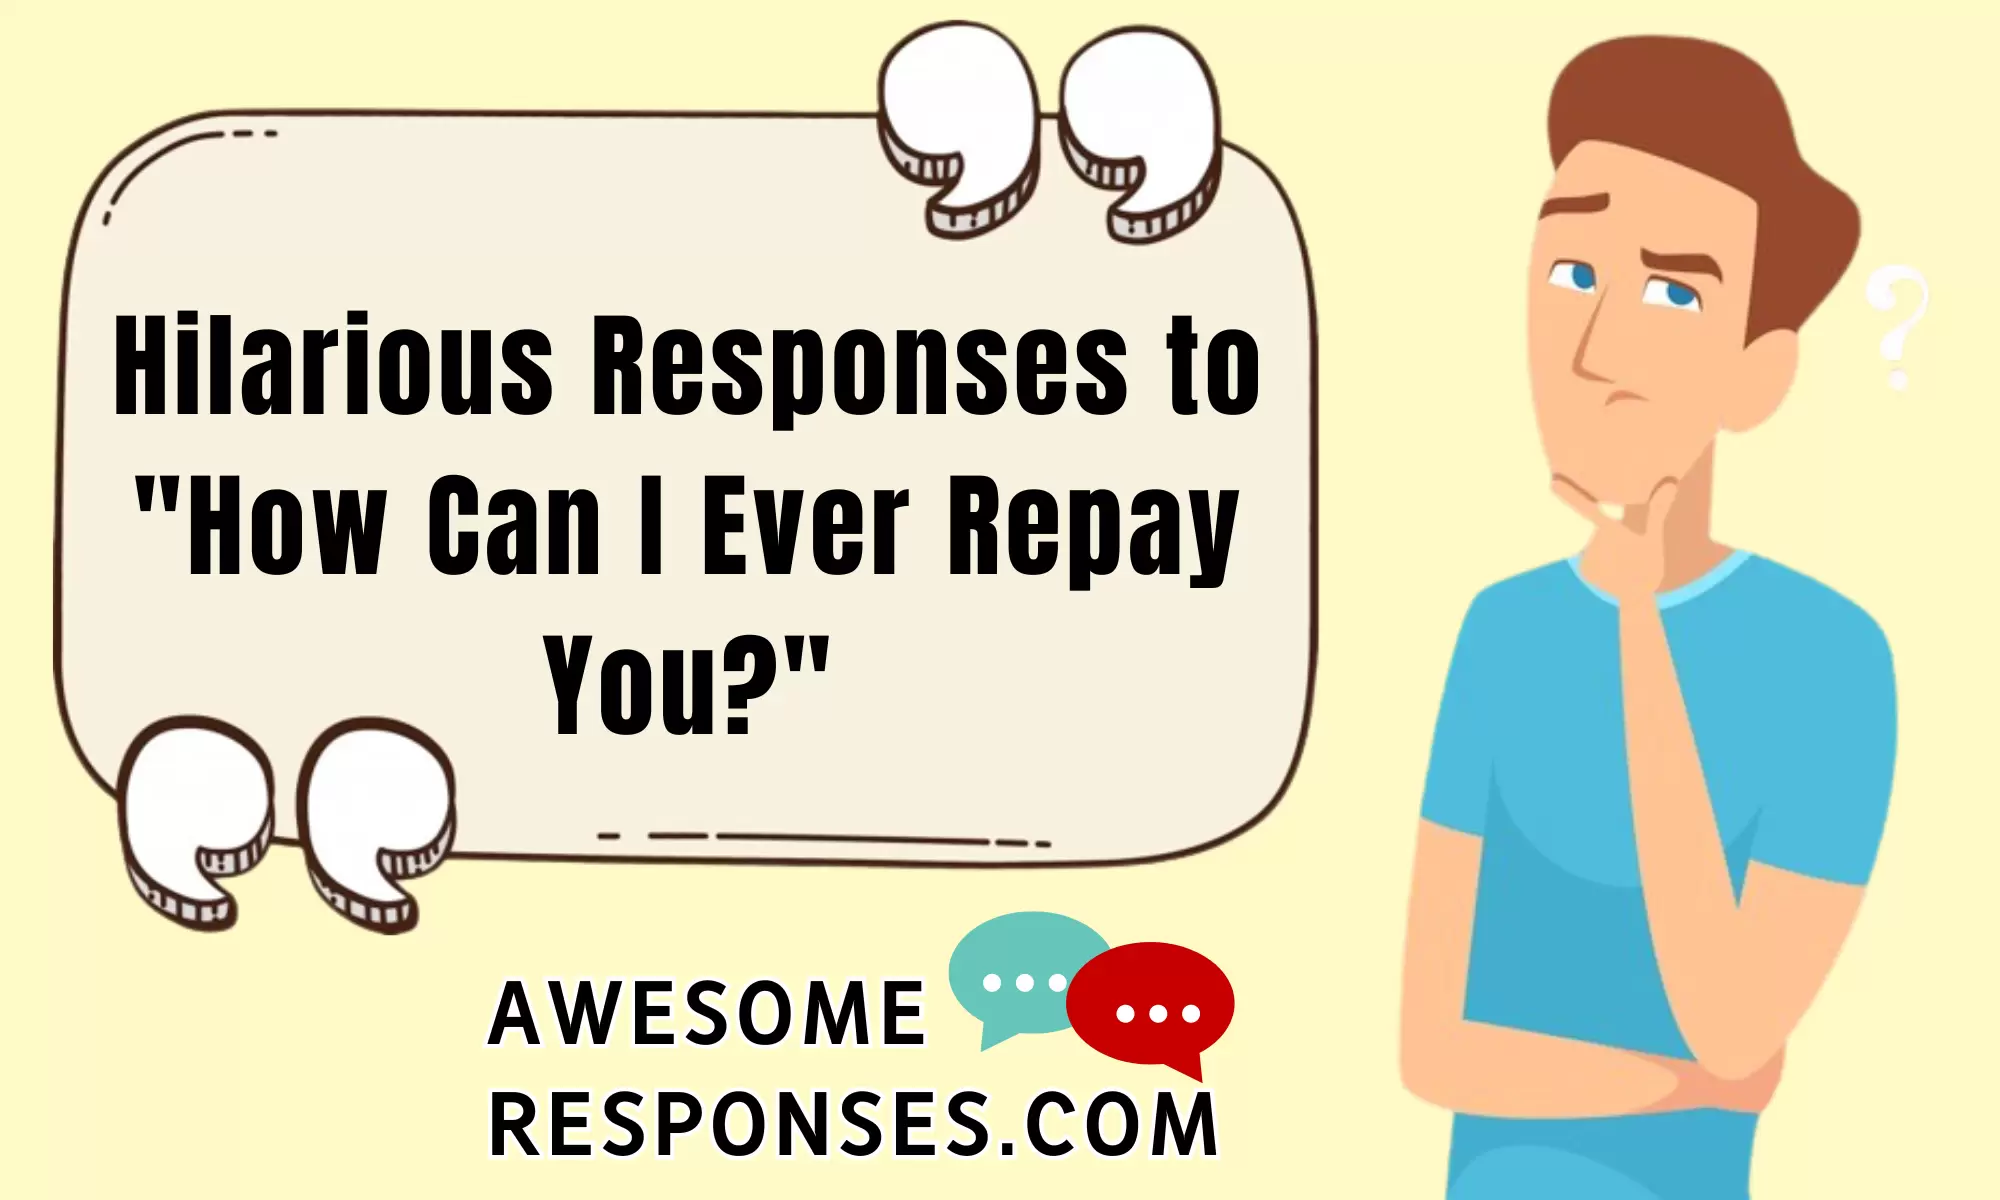 Hilarious Responses to "How Can I Ever Repay You?"